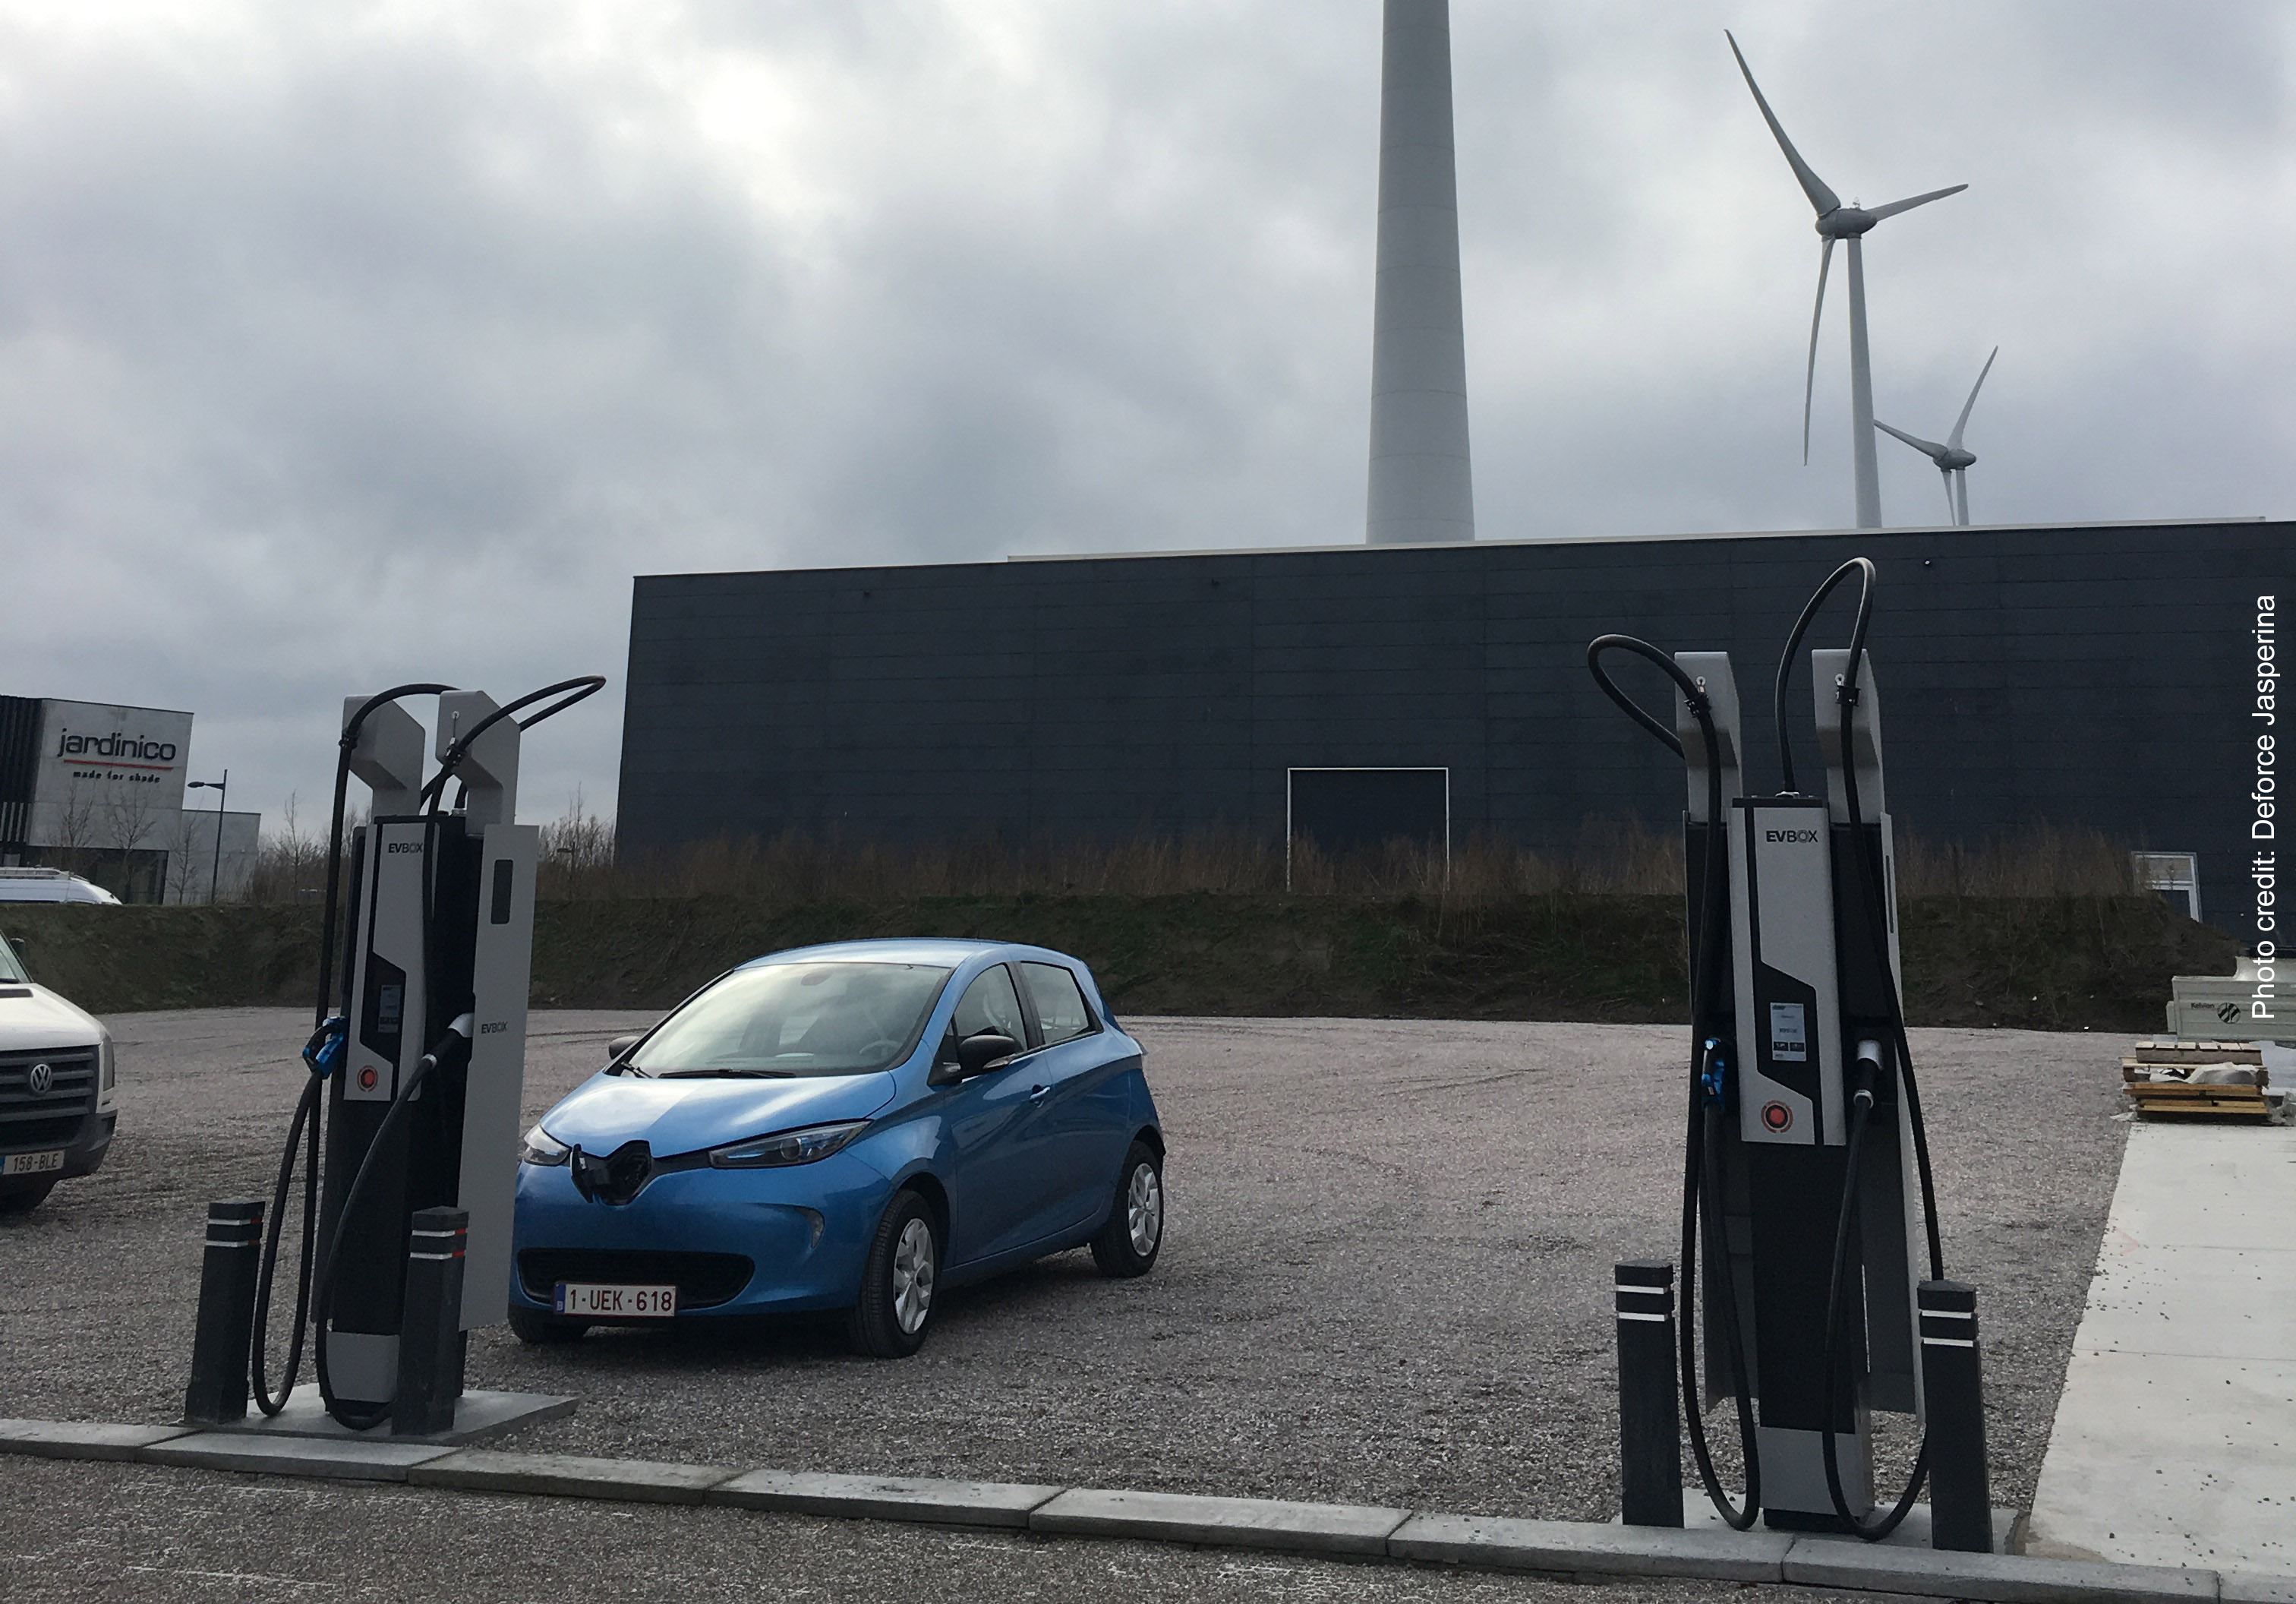 [NEWS] The spread of e-mobility in Flanders